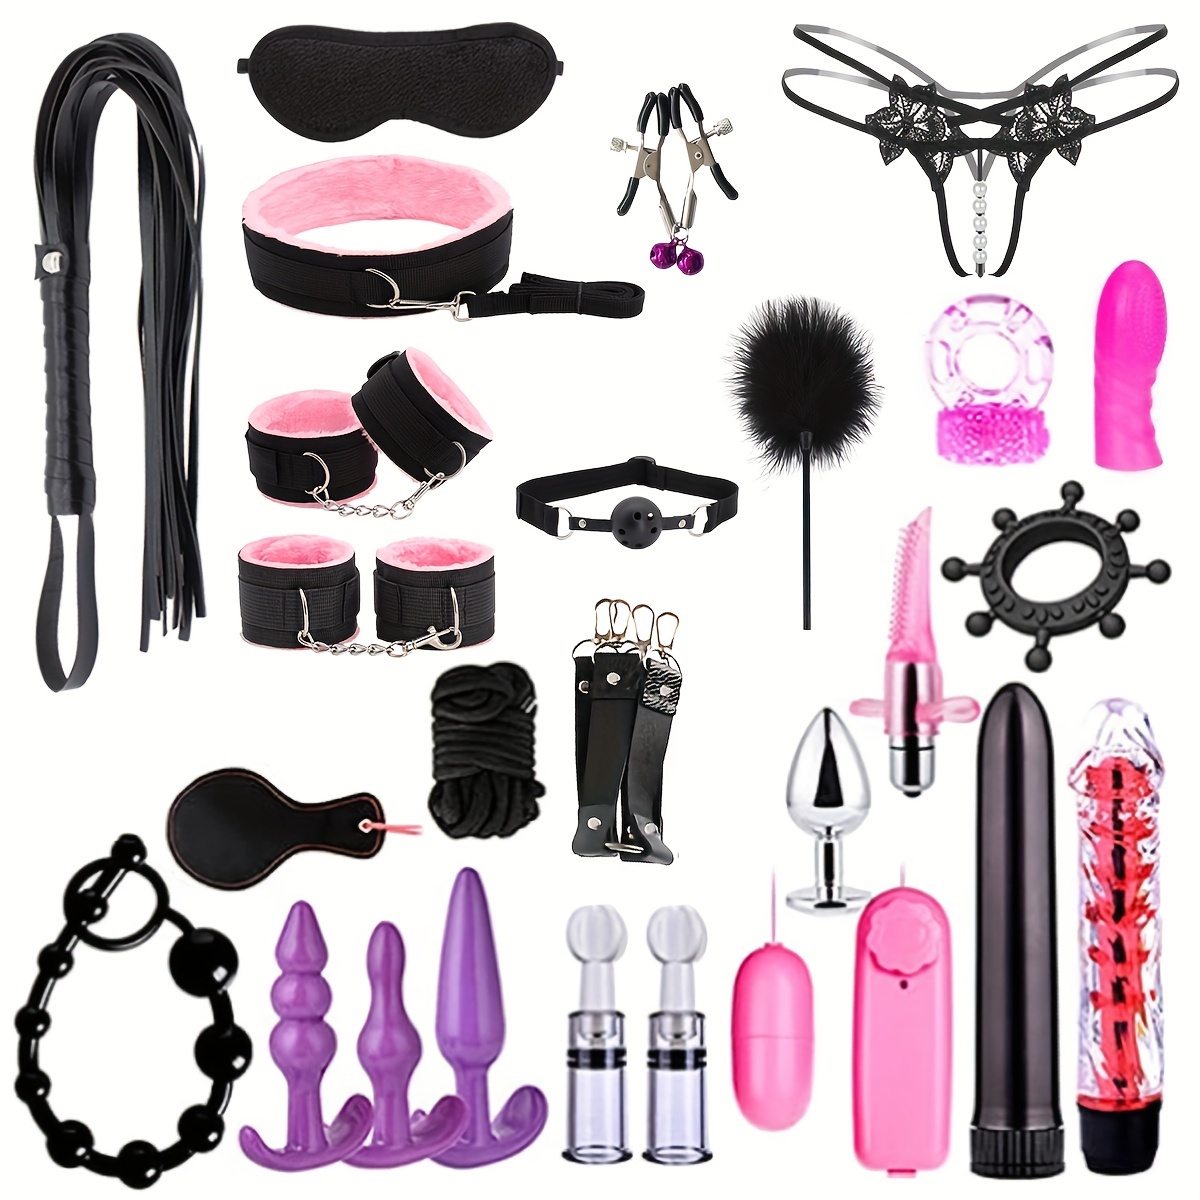 Dropship Leather Sex Toys For Adult Game Erotic BDSM Sex Kits Bondage  Handcuffs Sex Game Whip Gag SM Bdsm Toys Nipple Clamps Adult Toys to Sell  Online at a Lower Price